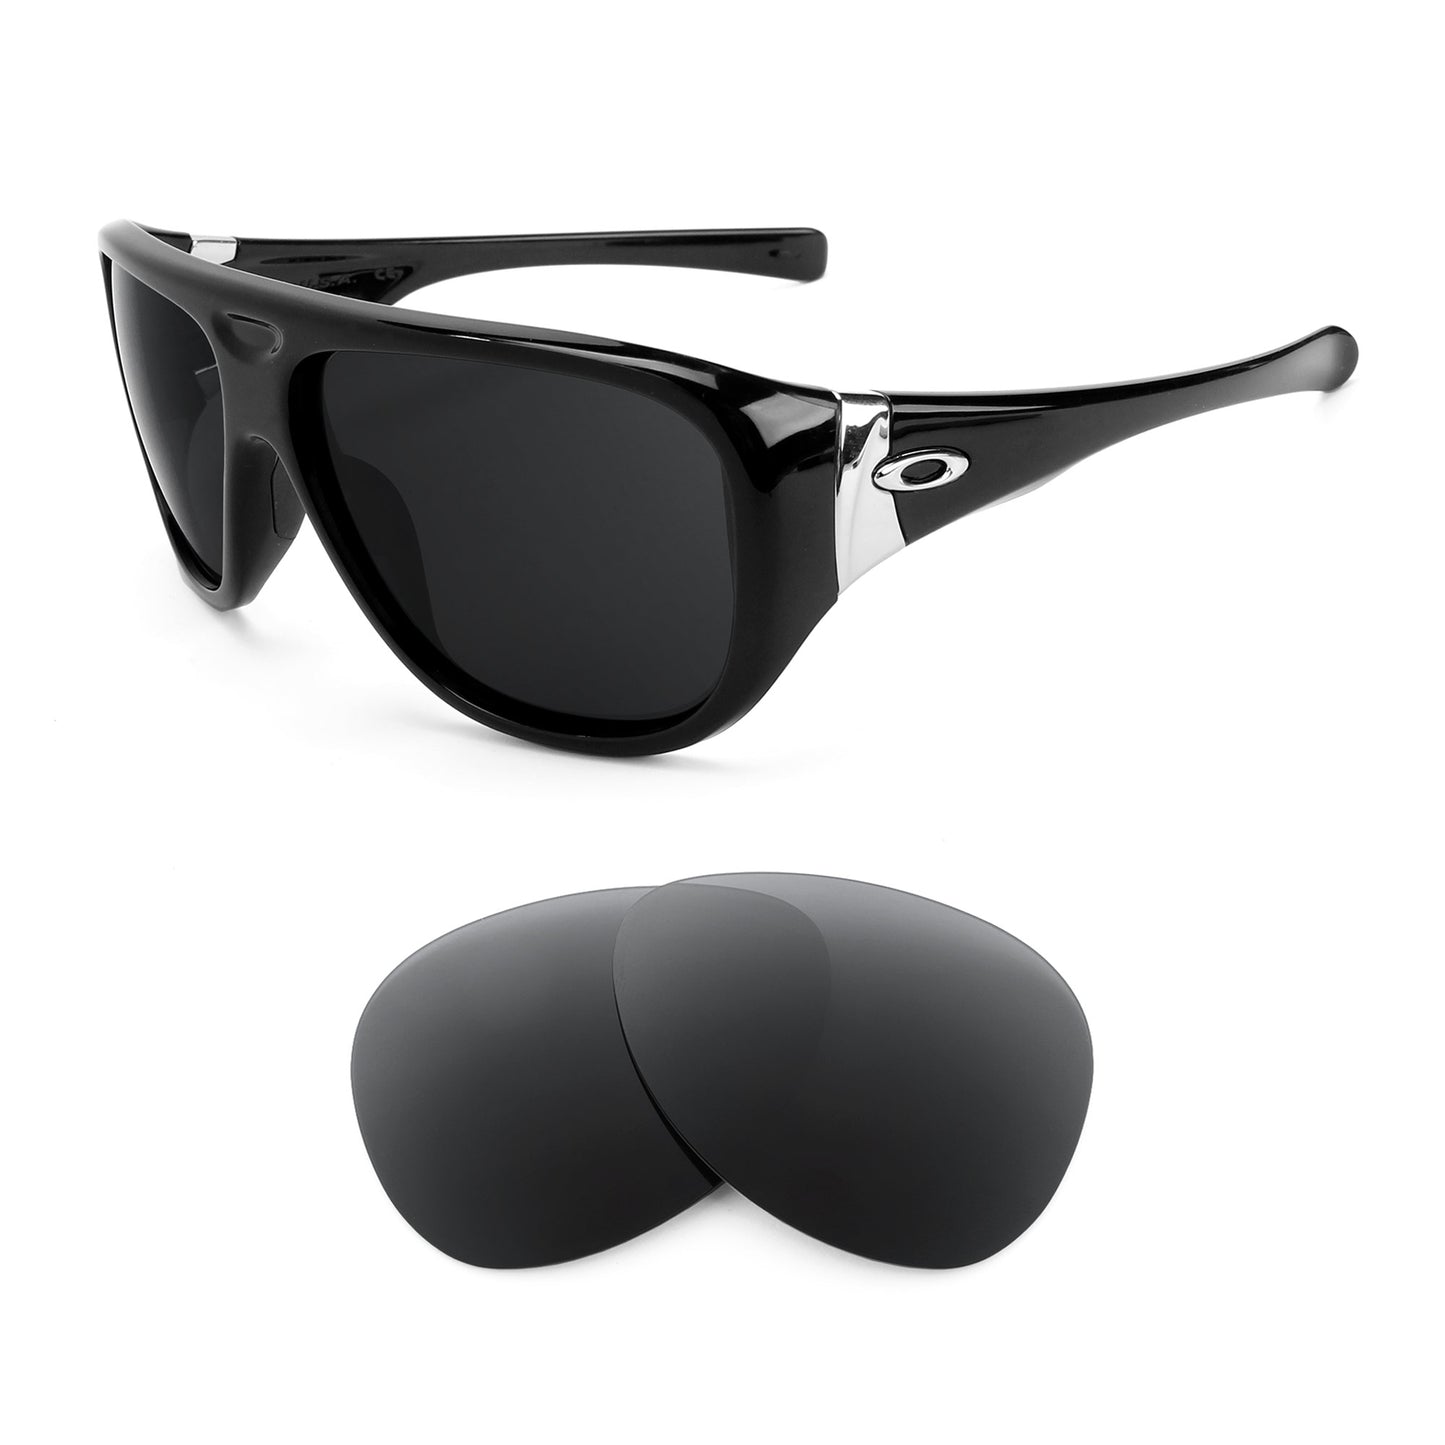 Oakley Correspondent sunglasses with replacement lenses